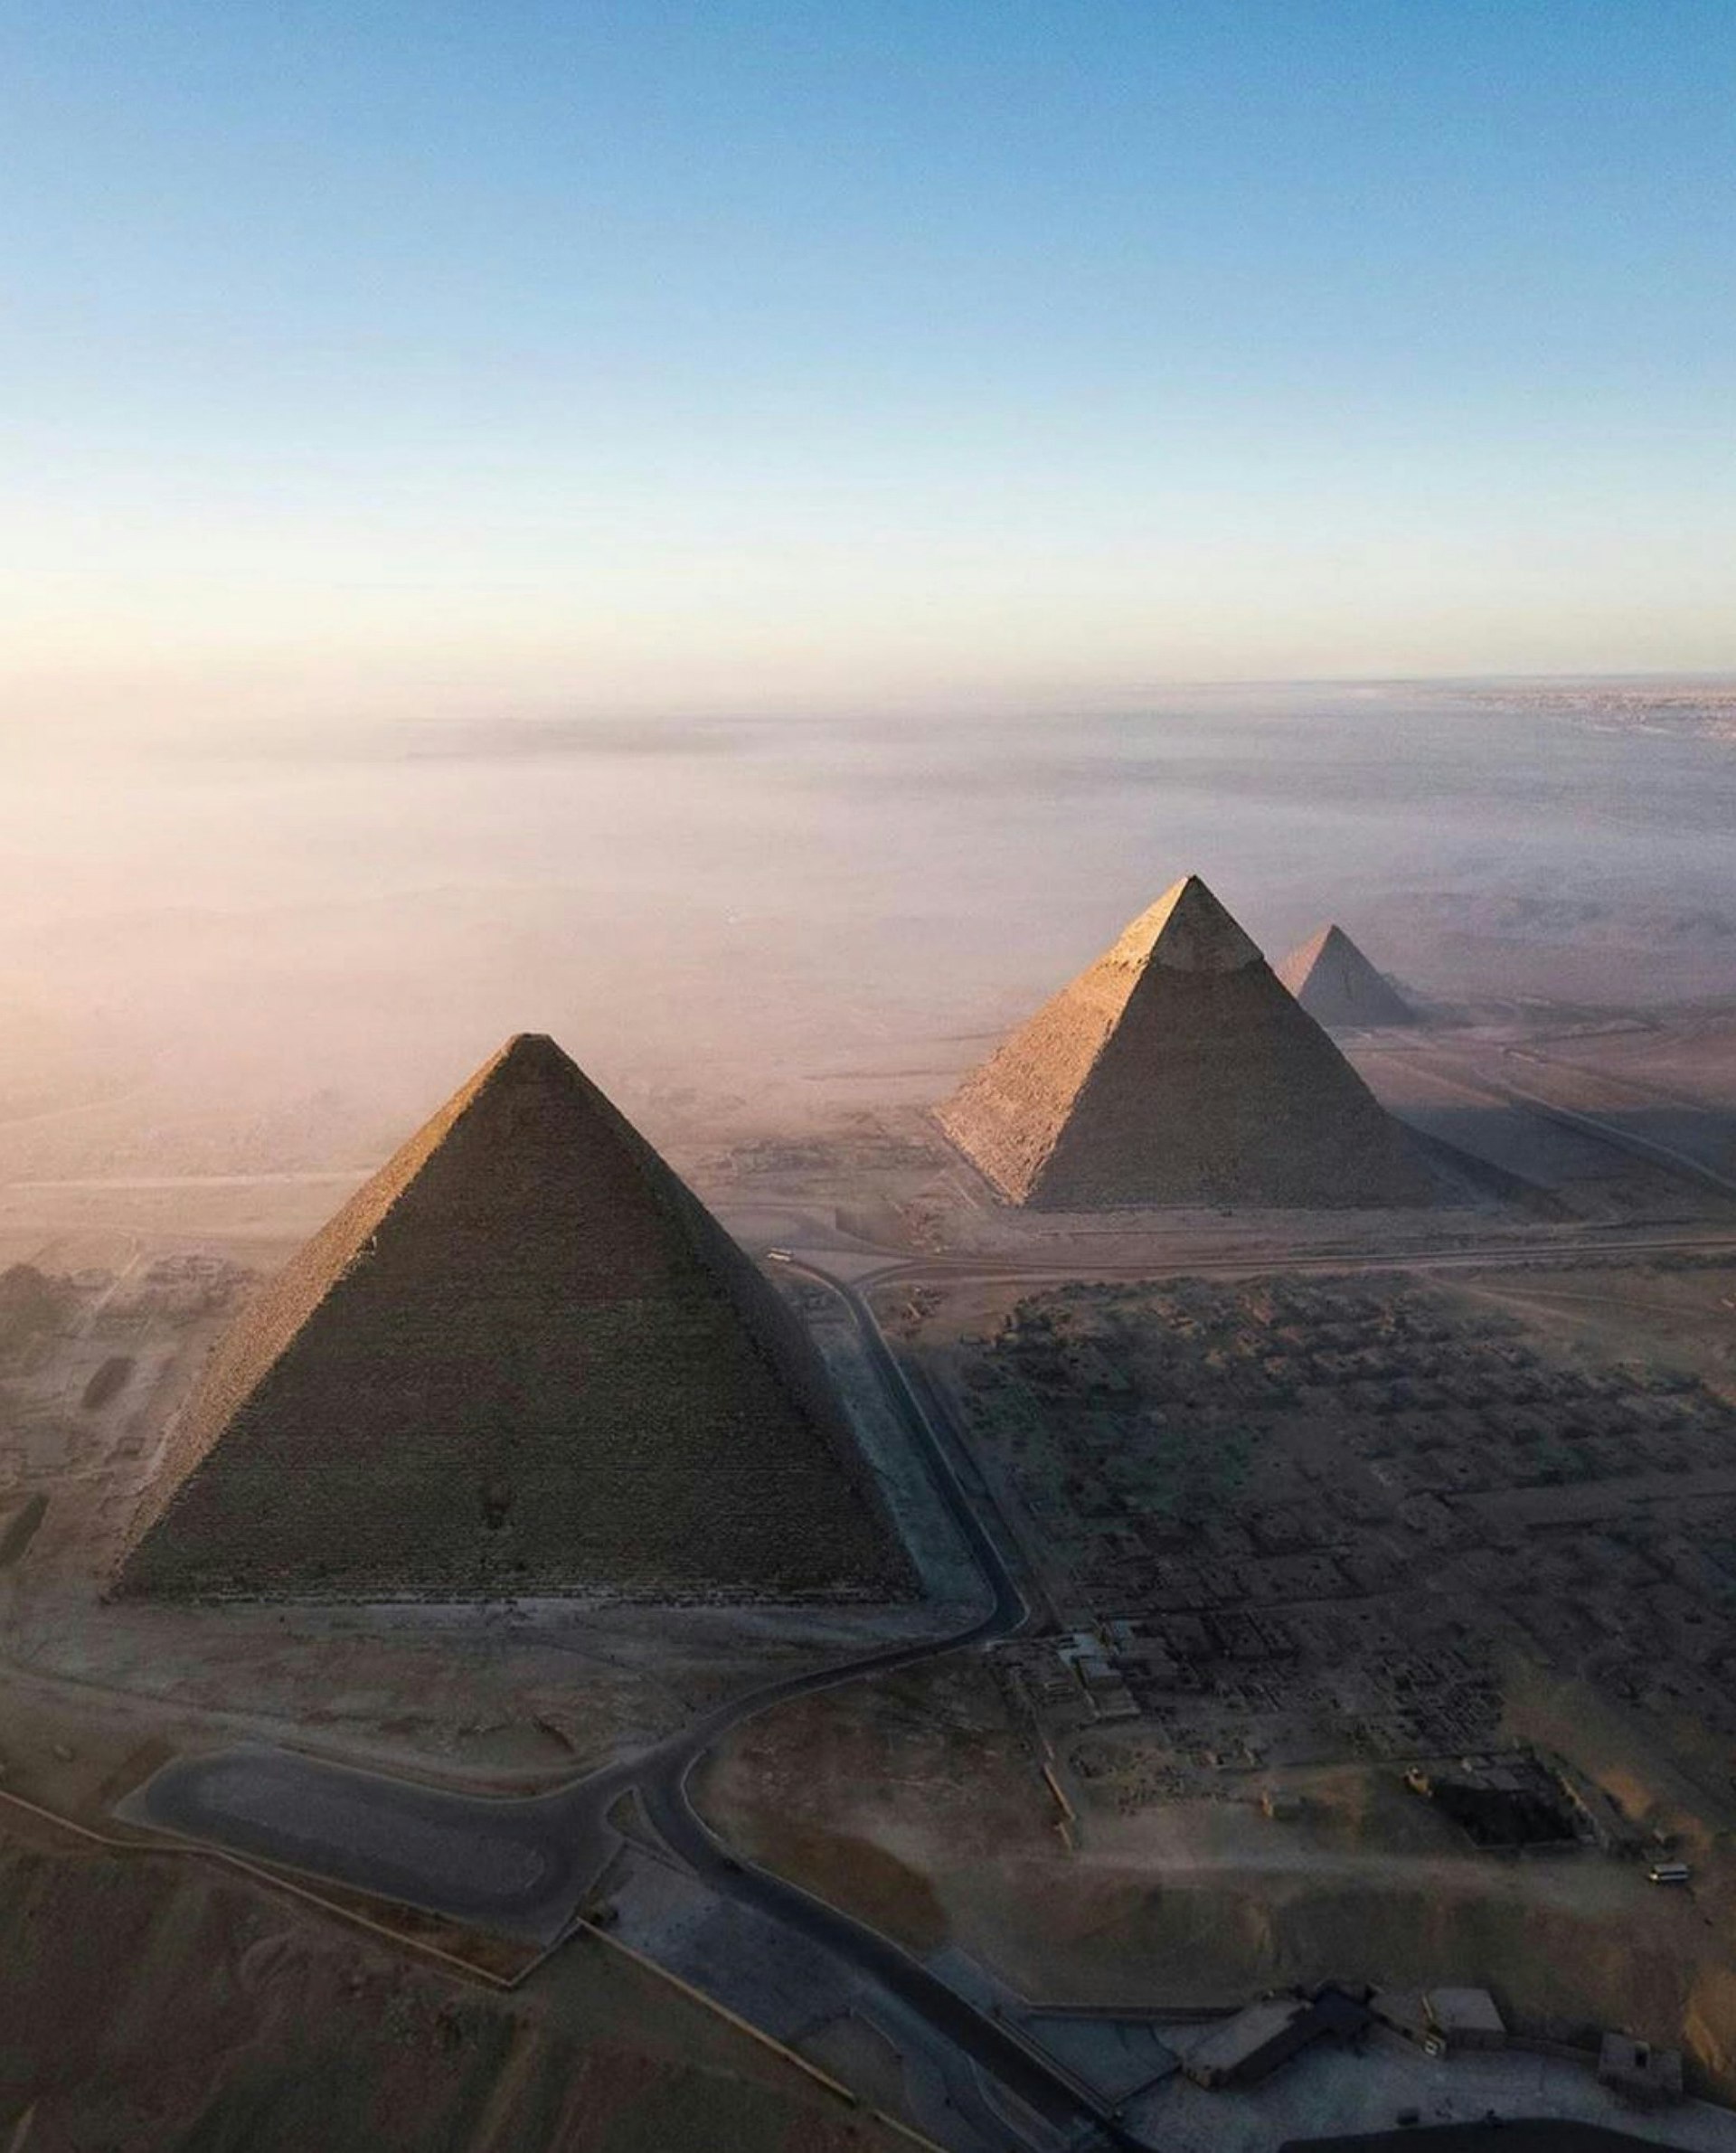 Aerial view of the pyramids of Giza in the desert by day